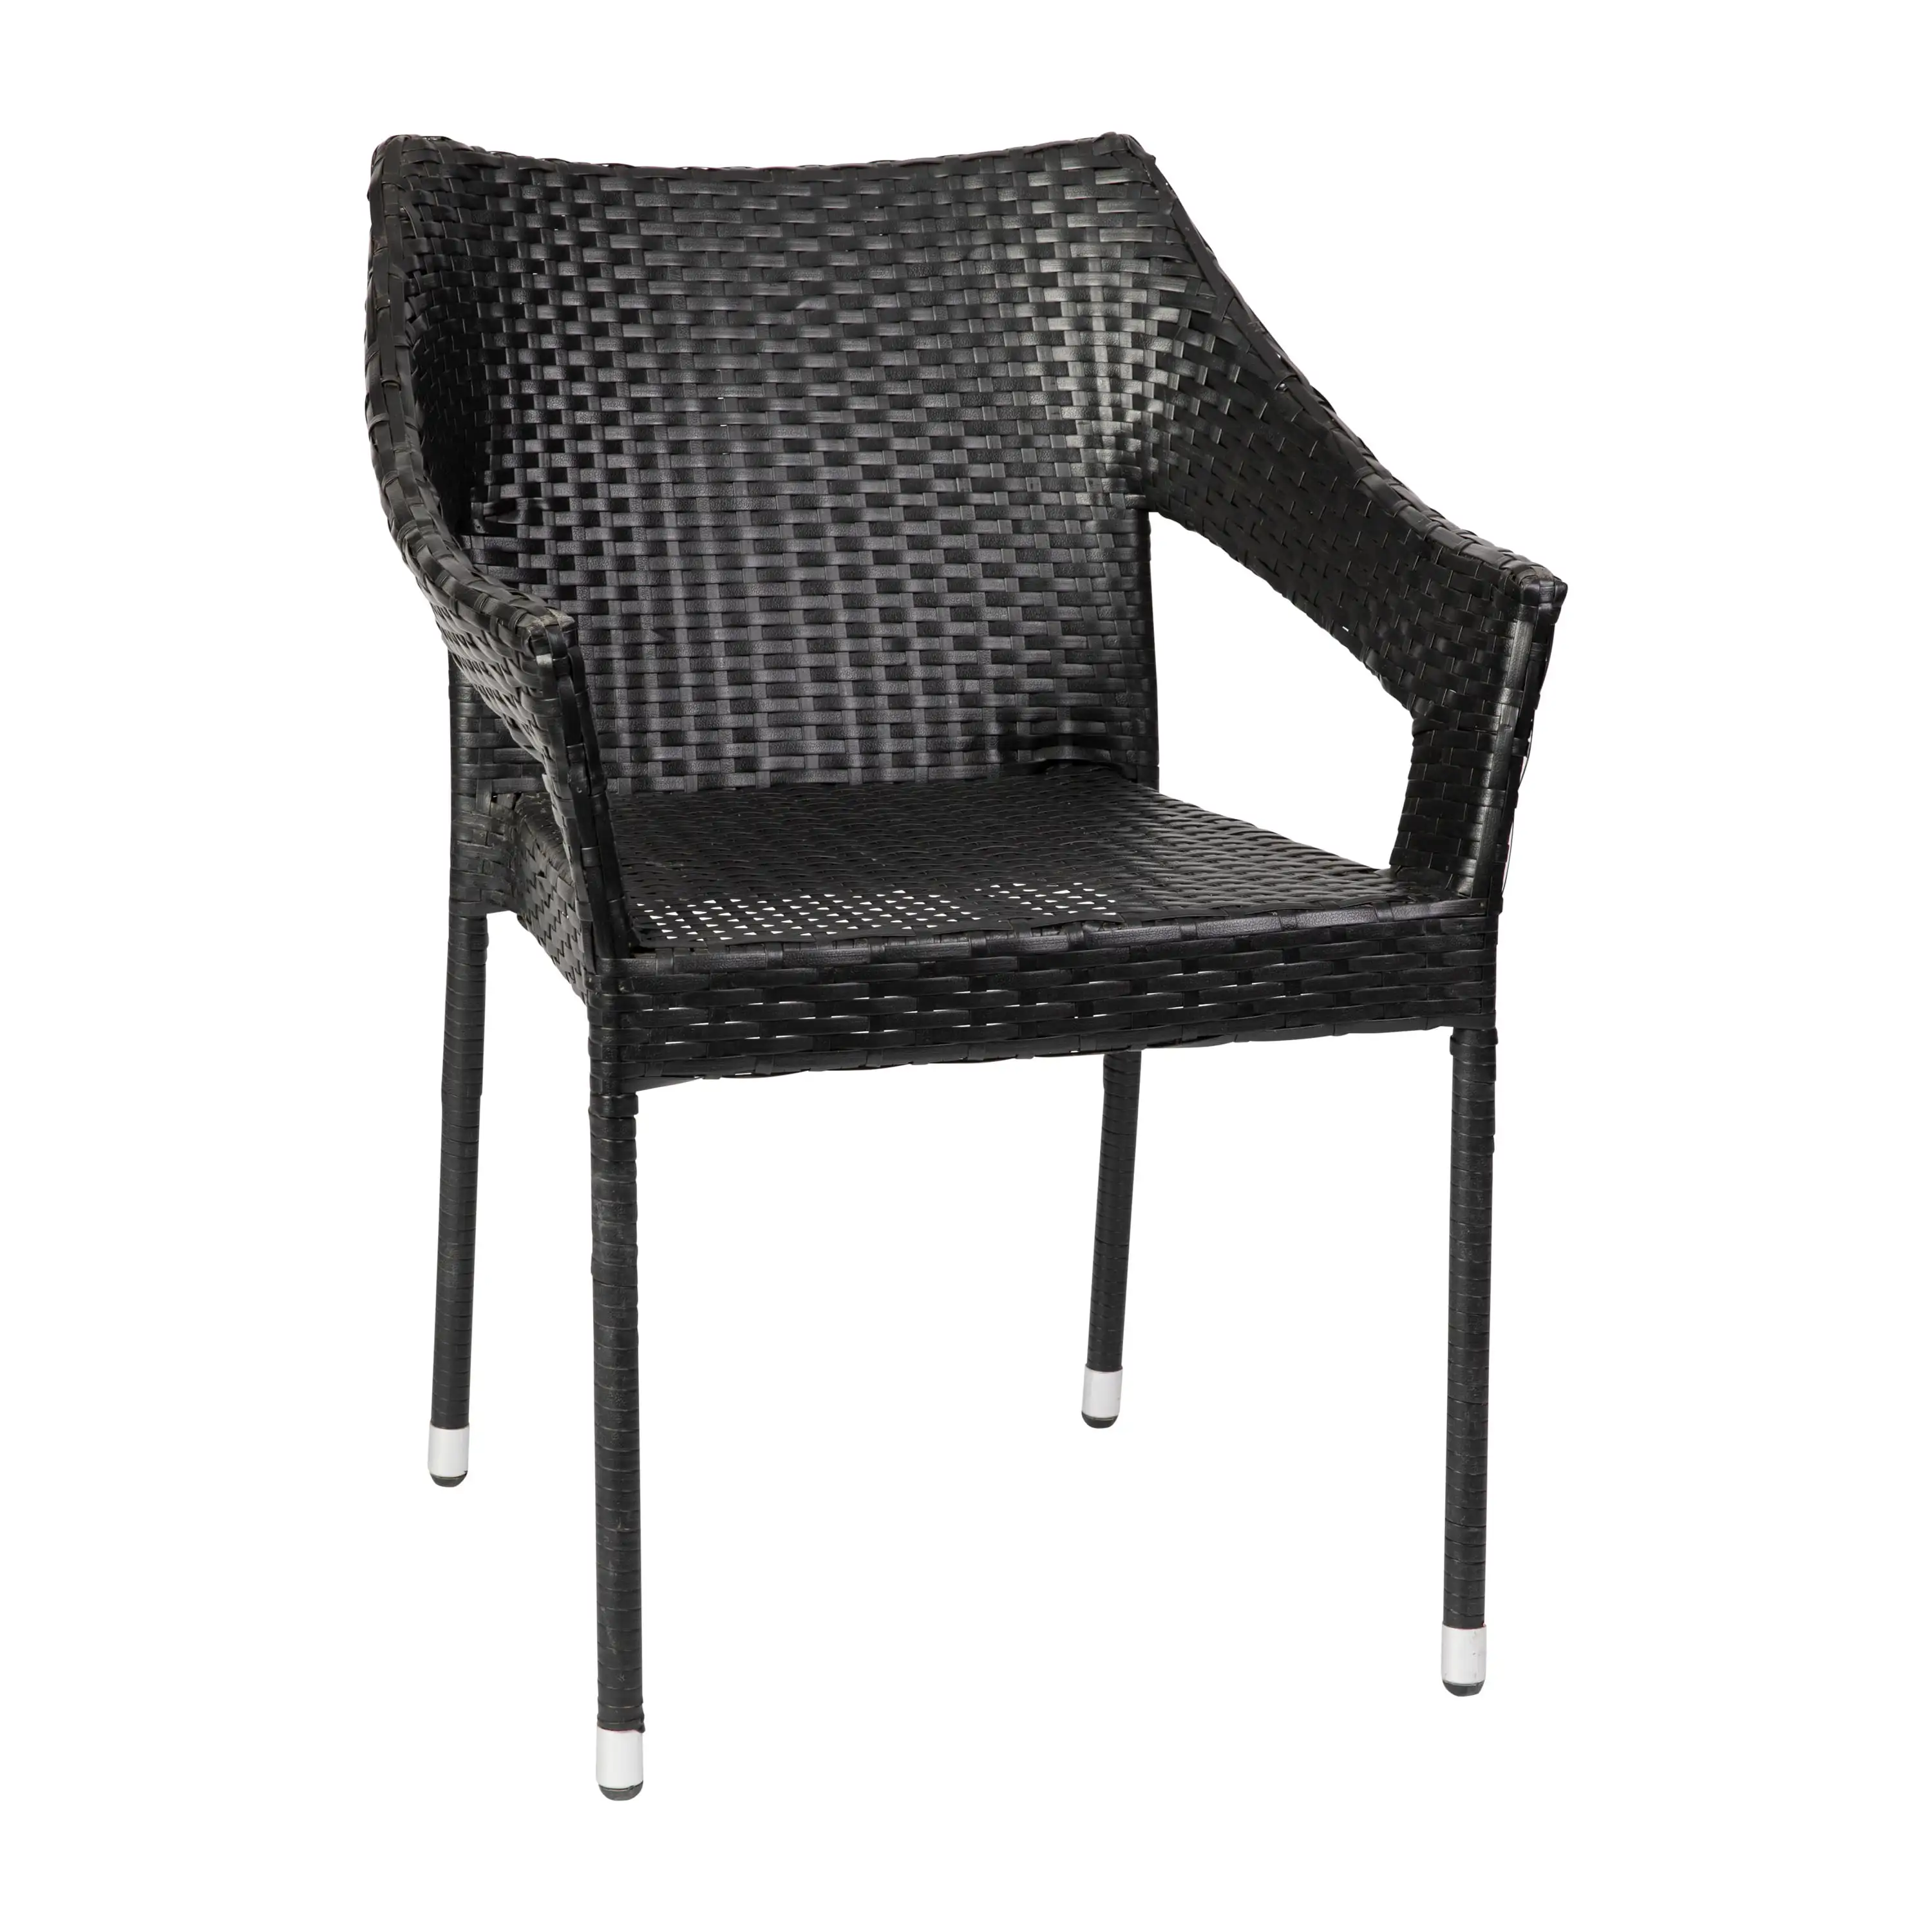 

Flash Furniture Ethan Commercial Grade Stacking Patio Chair, All Weather PE Rattan Wicker Patio Dining Chair in Black